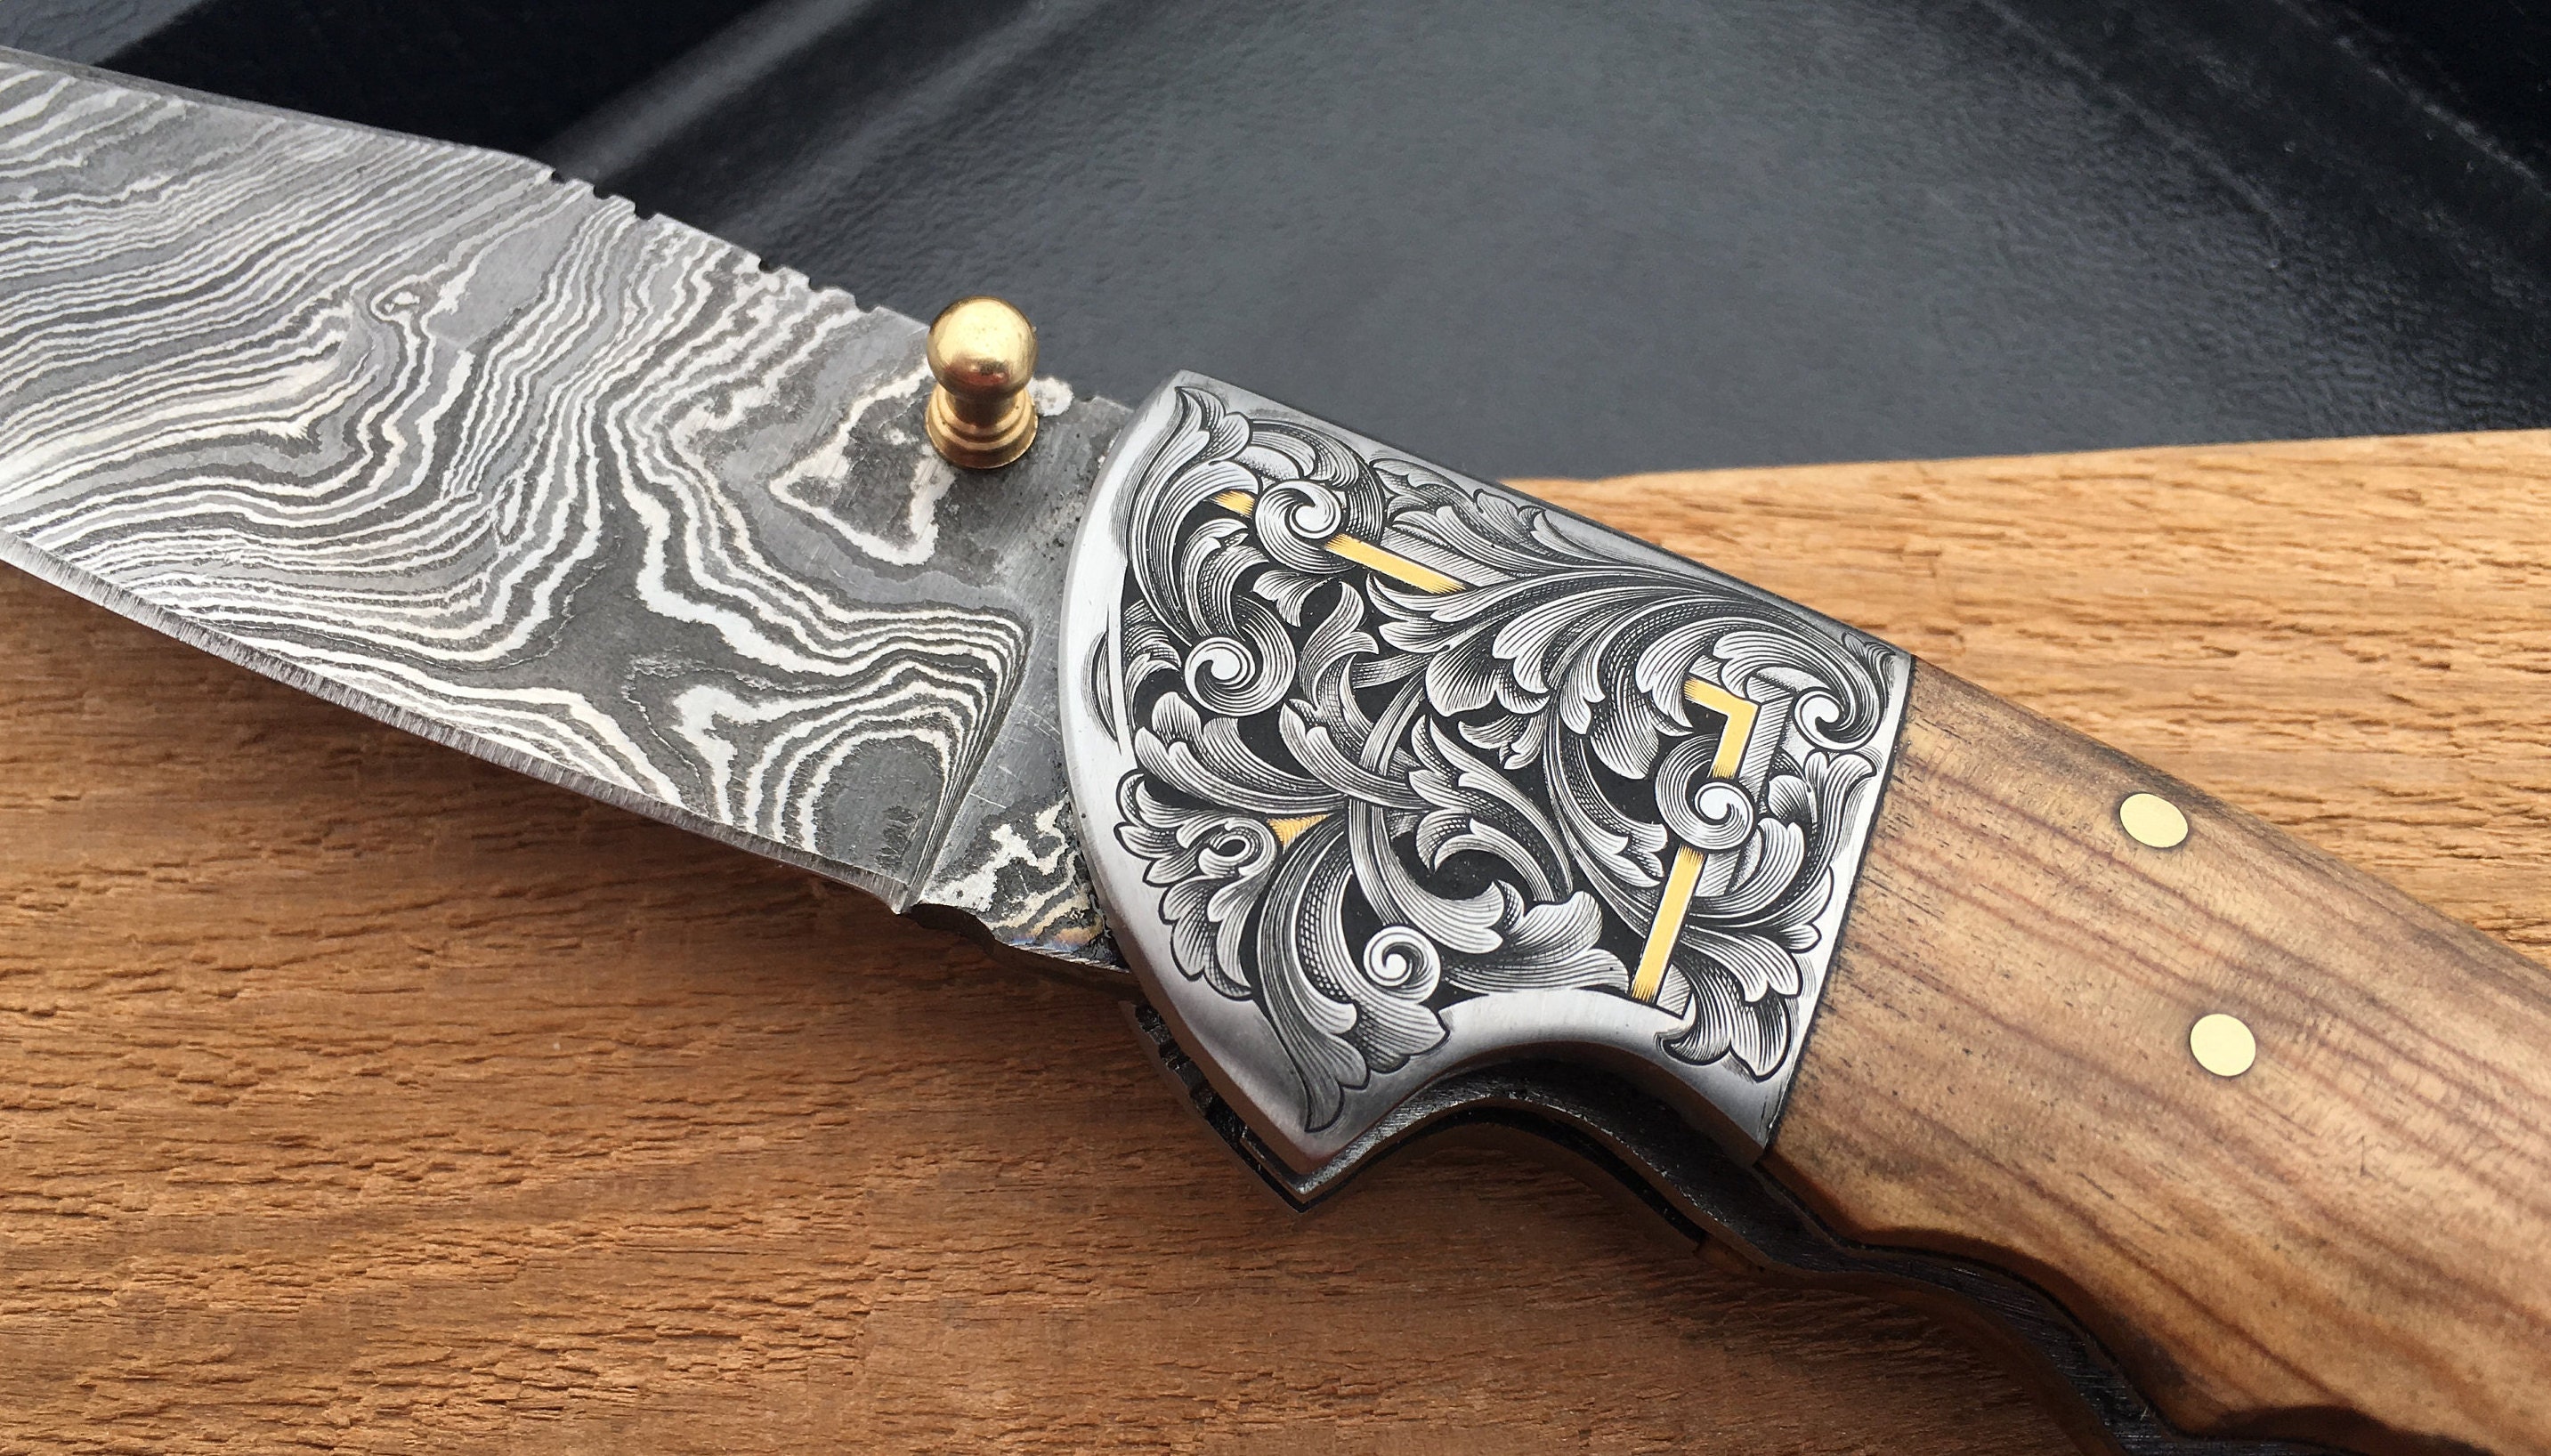 Knife - Electra Parer Damascus Cutlery Blade with Bolster